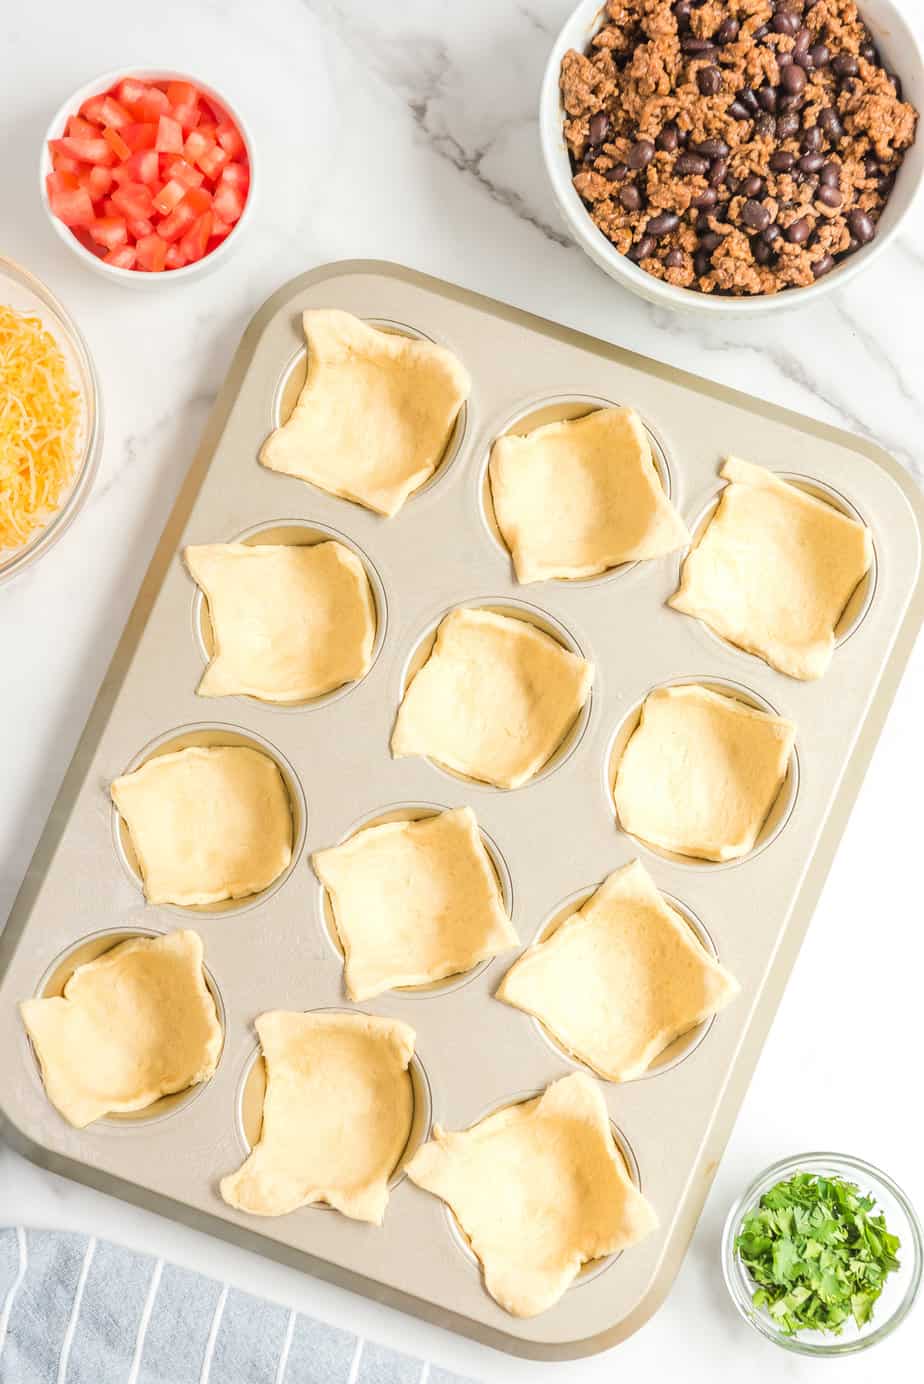 Crescent dough pieces place in a muffin tin on a counter from above.